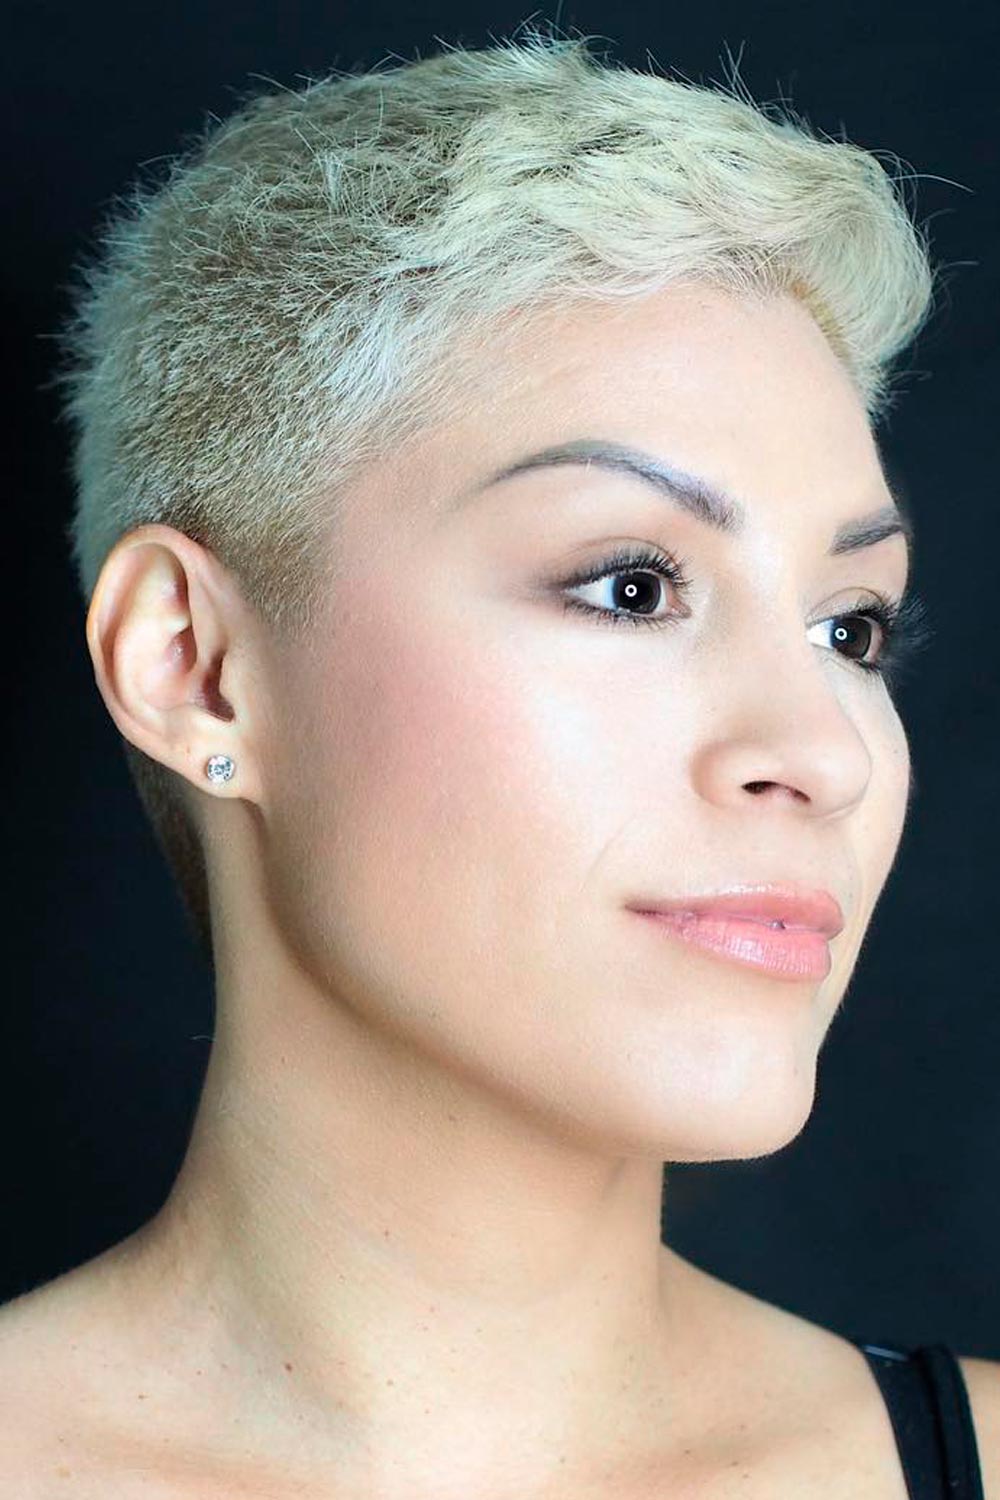 A Super Short Pixie Hairstyle